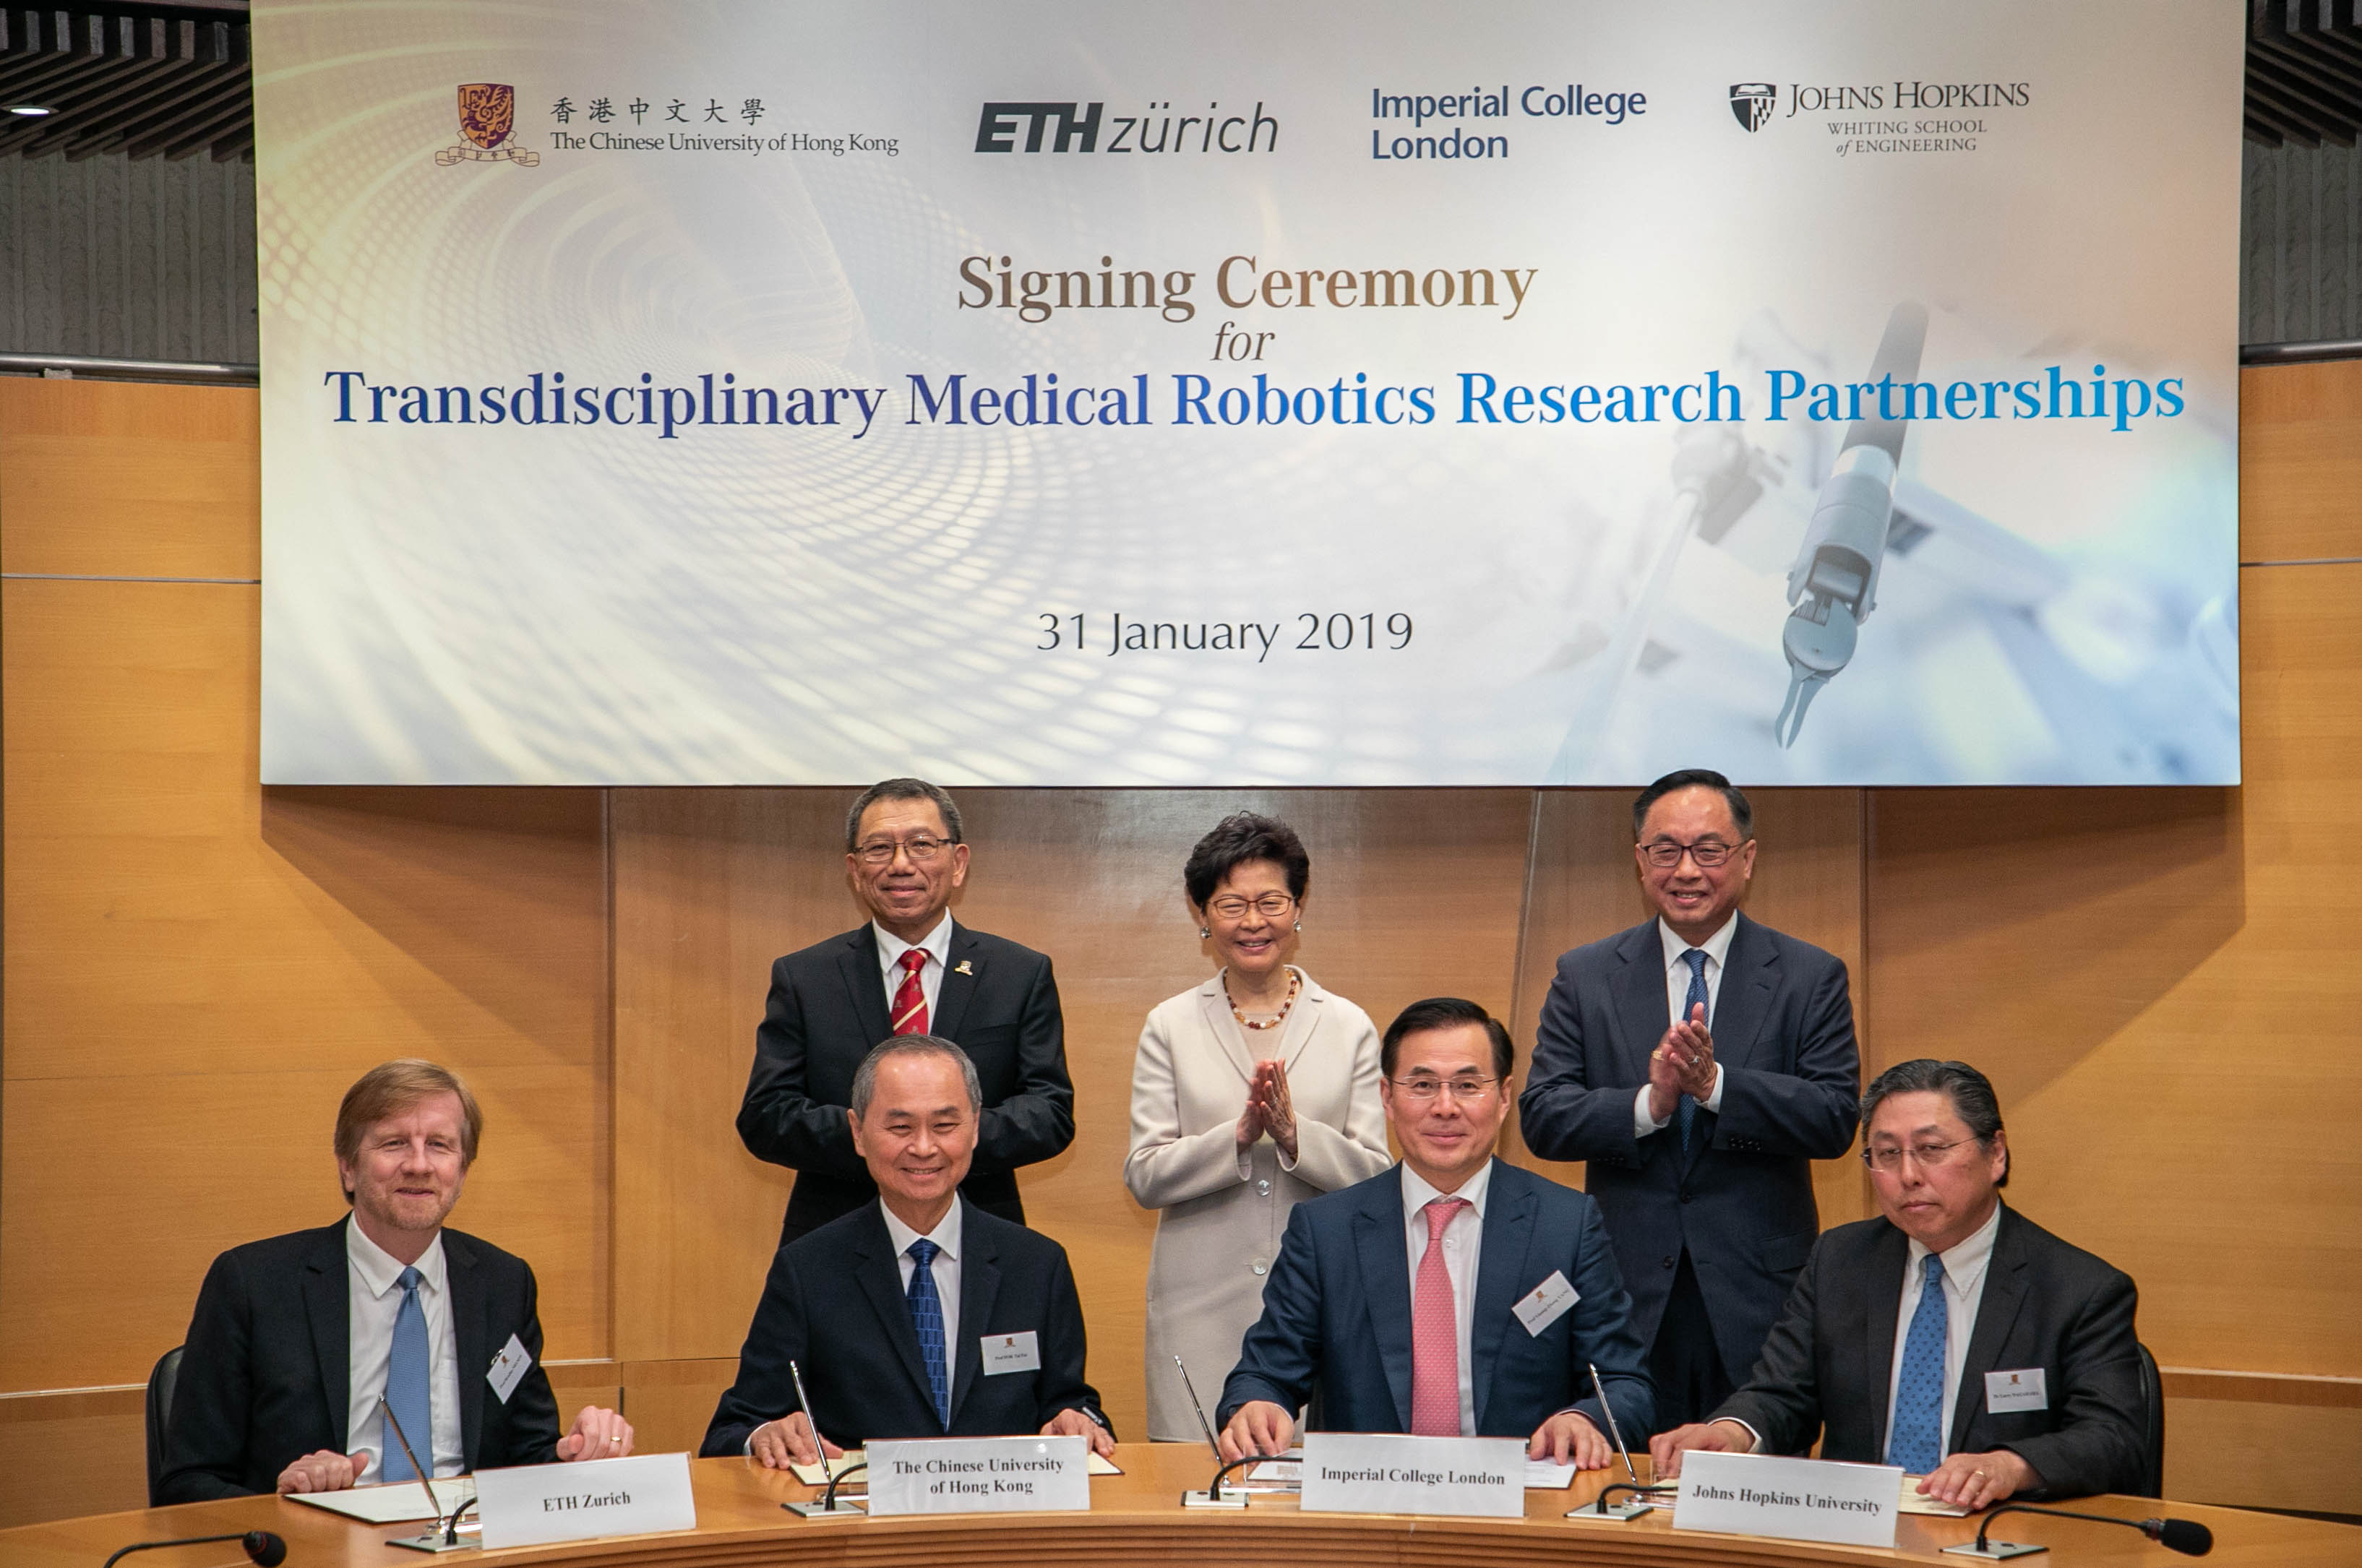 The Chinese University of Hong Kong (CUHK) established partnerships with ETH Zurich, Imperial College London and Johns Hopkins University to deepen ties on transdisciplinary medical robotics research. The event was witnessed by The Hon Mrs. Carrie LAM CHENG Yuet-ngor (back row center), The Chief Executive of the Hong Kong Special Administrative Region (HKSAR); Professor Rocky S. TUAN (back row left), Vice-Chancellor and President of CUHK; and Mr. Nicholas W. YANG (back row right), Secretary for Innovation and Technology of the HKSAR Government.